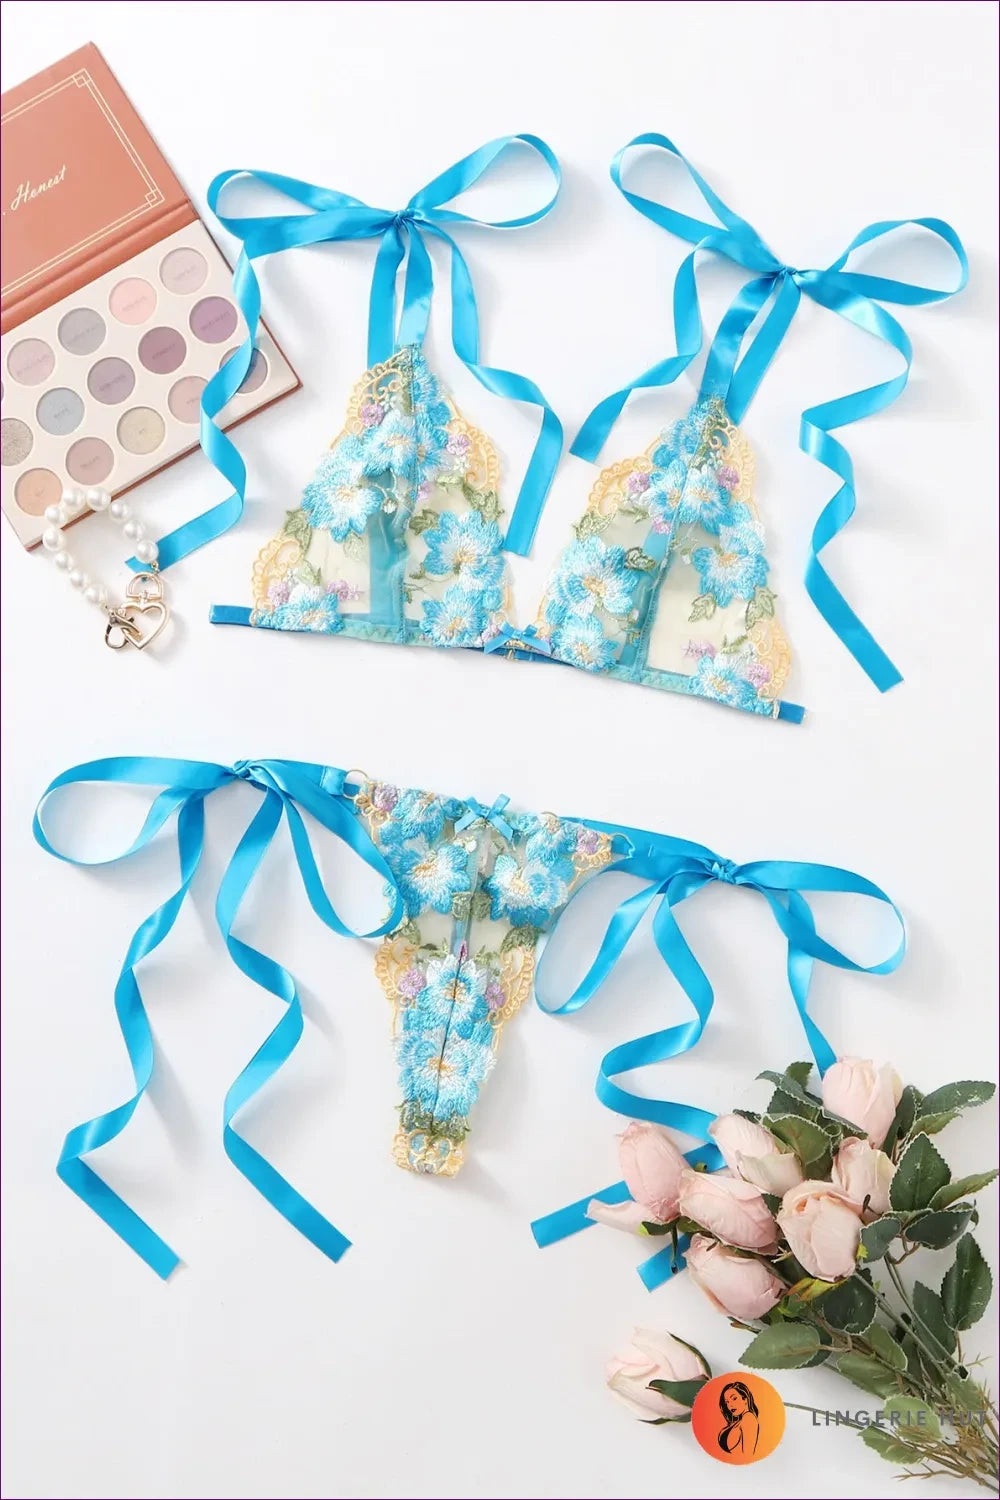 Discover The Blue Bow Floral Bikini Bra Set, a Treasure Trove Of Beauty With Its Playful Ties And Exquisite